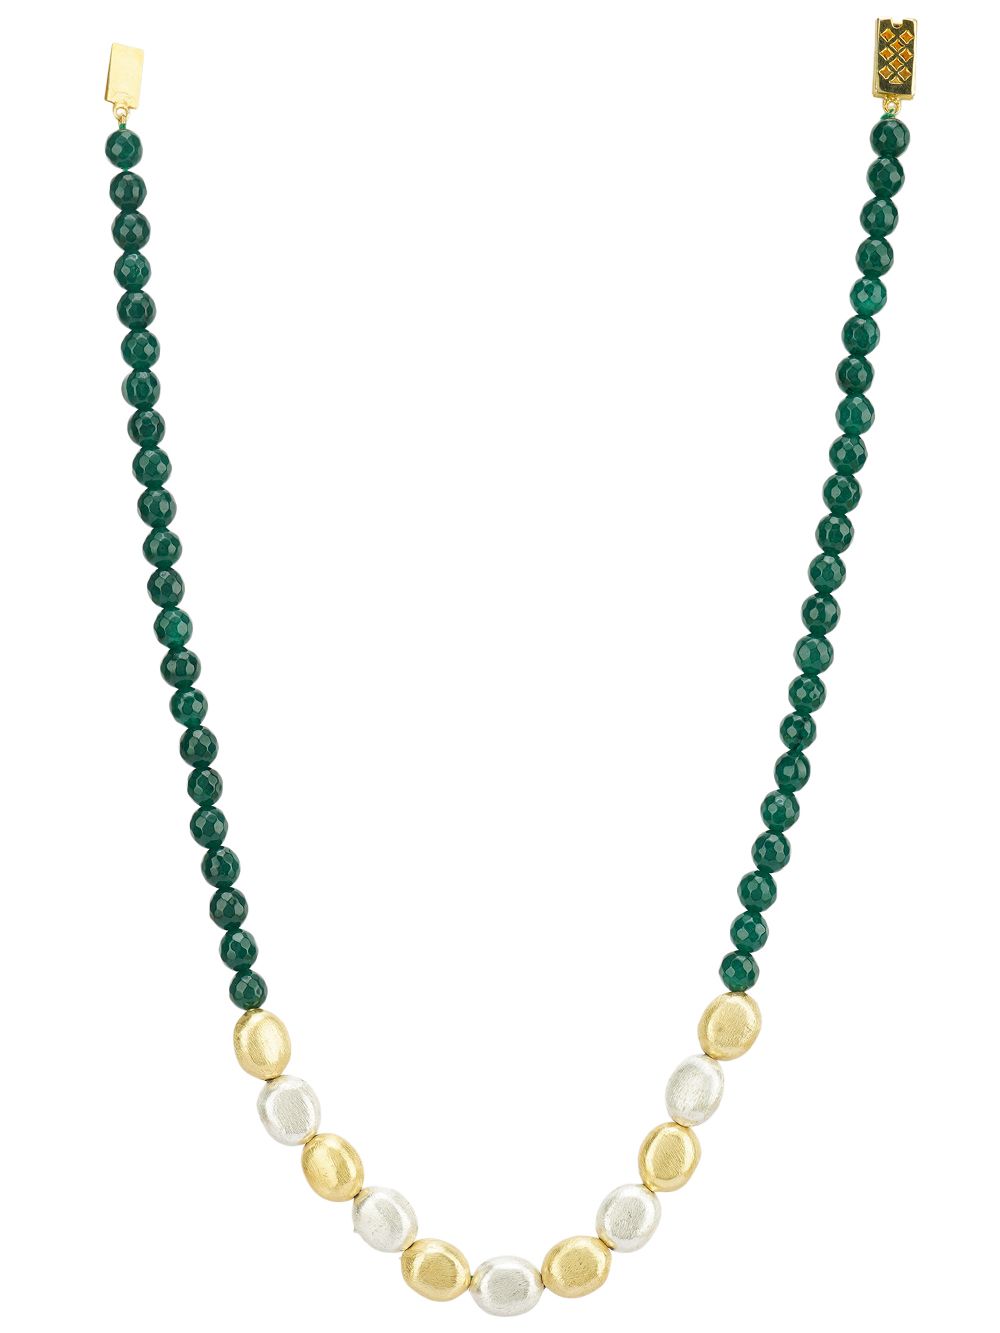 Green Handcrafted  Matte  Beaded Necklace